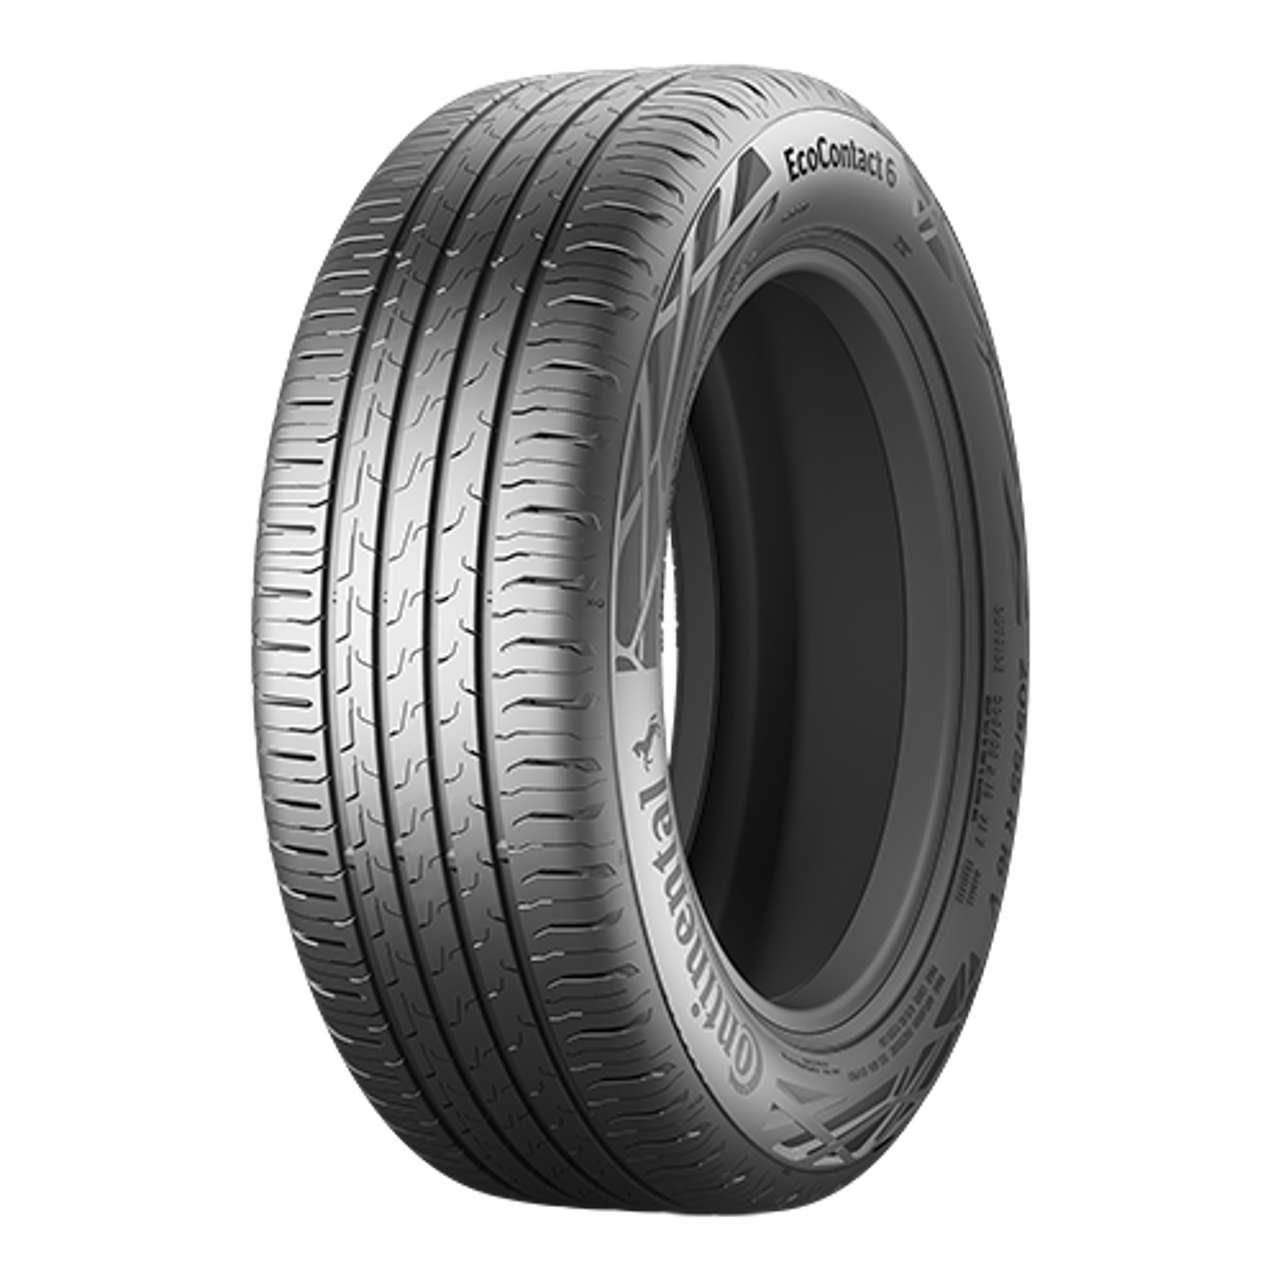 CONTINENTAL ECOCONTACT 6 (EVc) 225/45R17 91V BSW von Continental